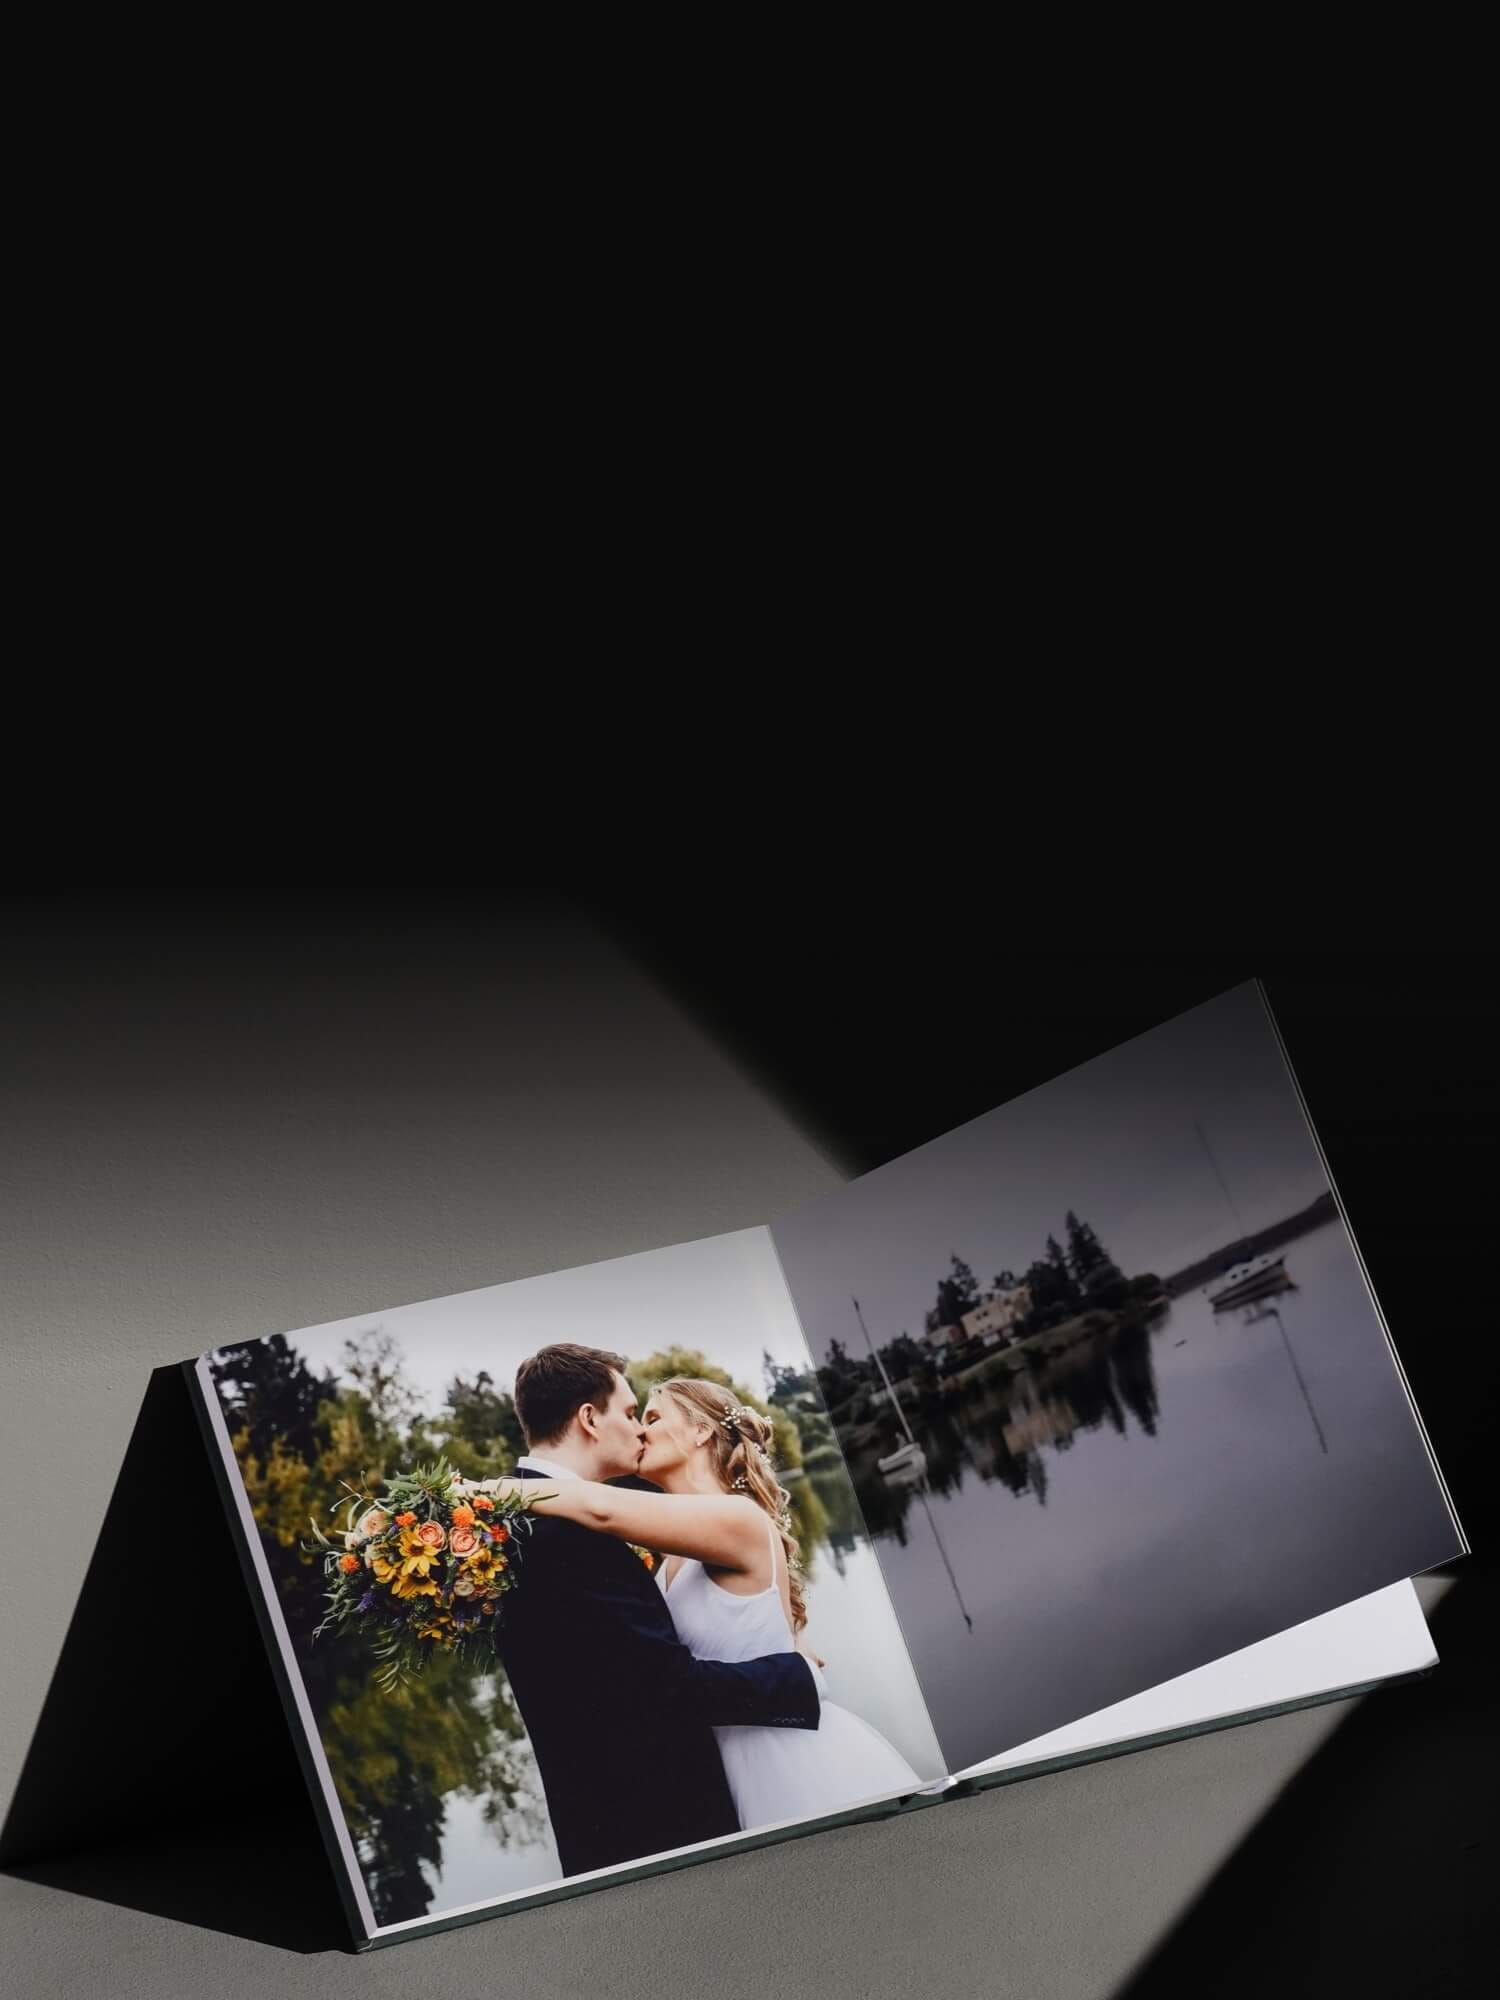 Classic Black Matted Photo Album: 10x10 Personalised Cover Option